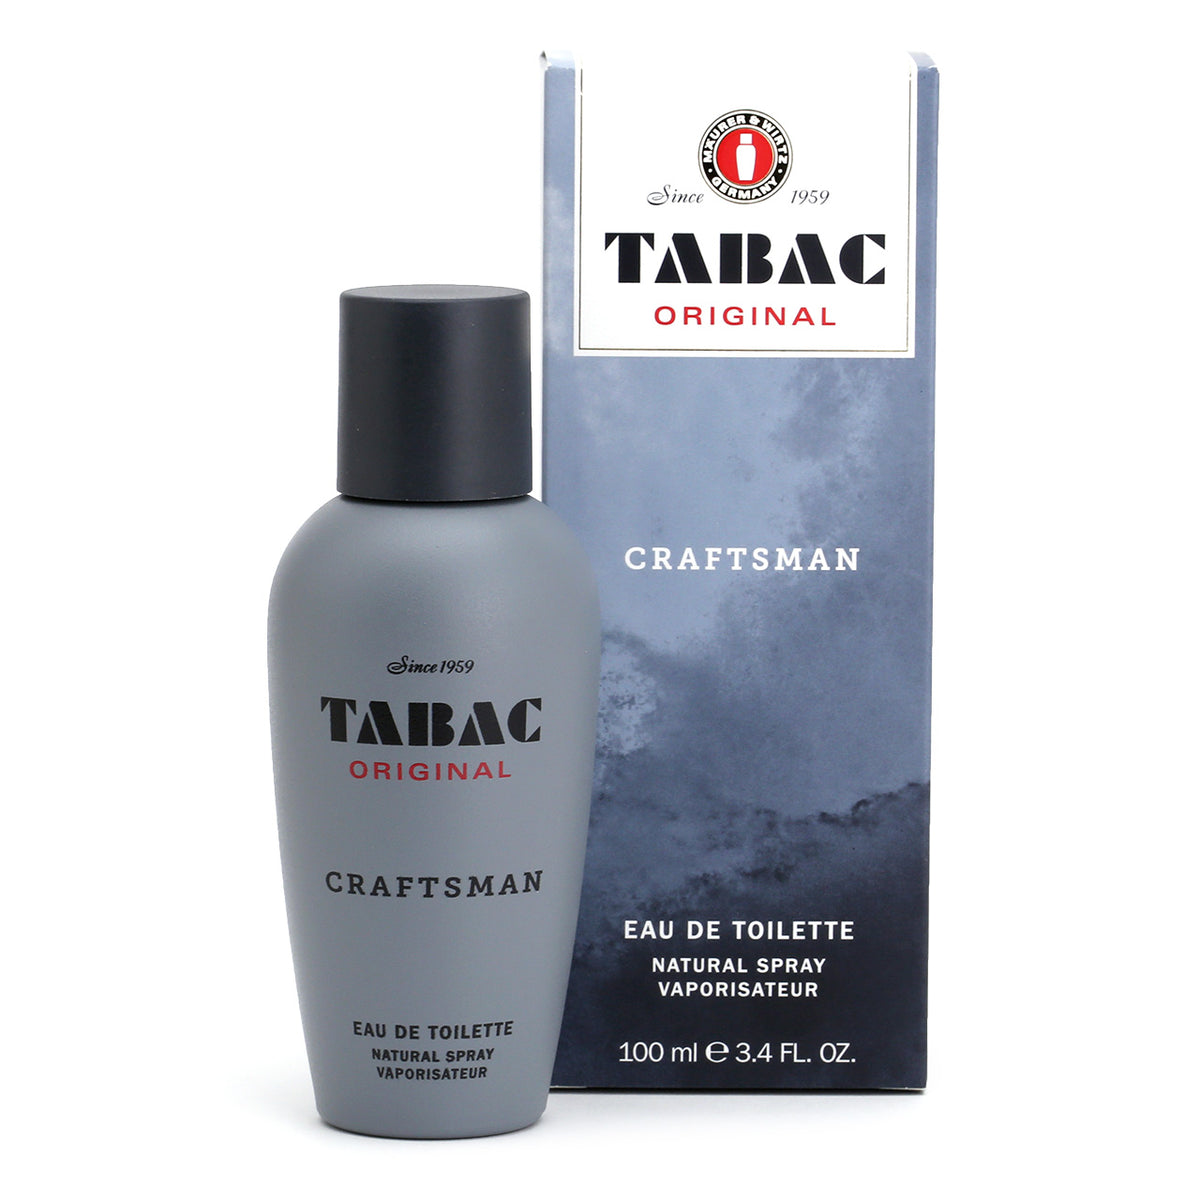 Tabac Original Craftsman EDT in a 100ml bottle with spray